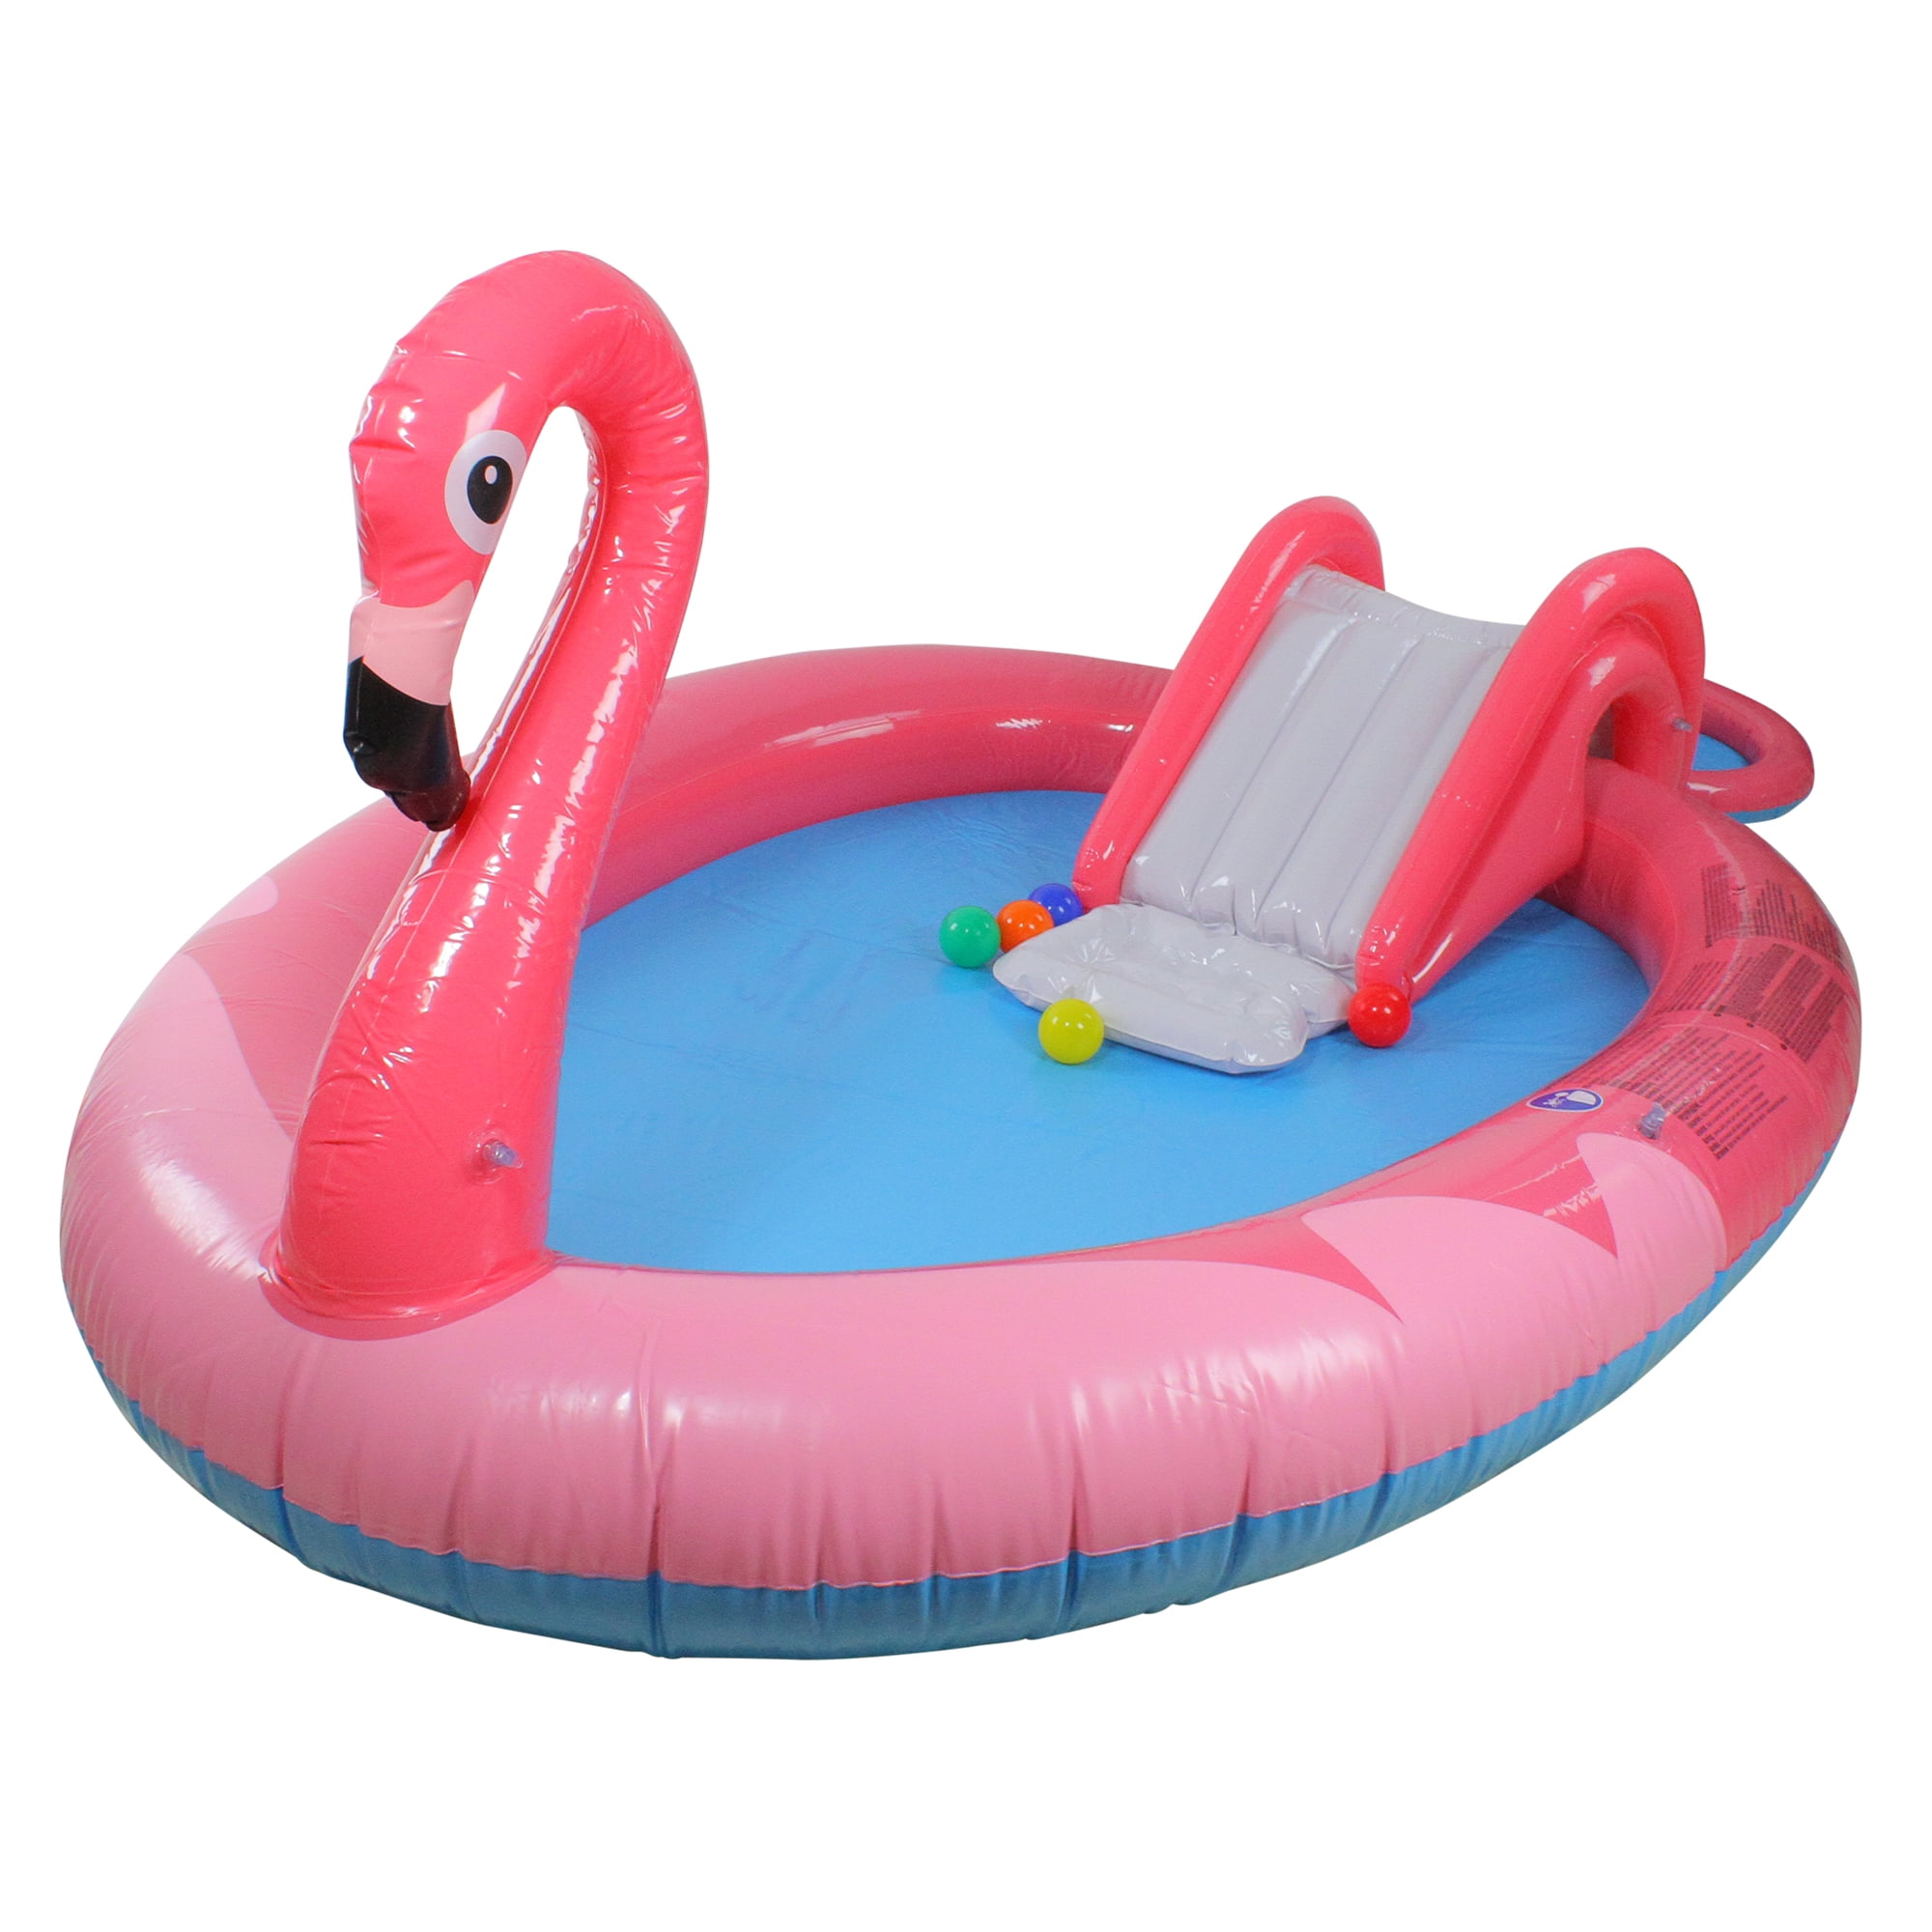 Intex Mystic Unicorn Inflatable Spray Pool for Ages 2+ 107" X 76" X 41" 